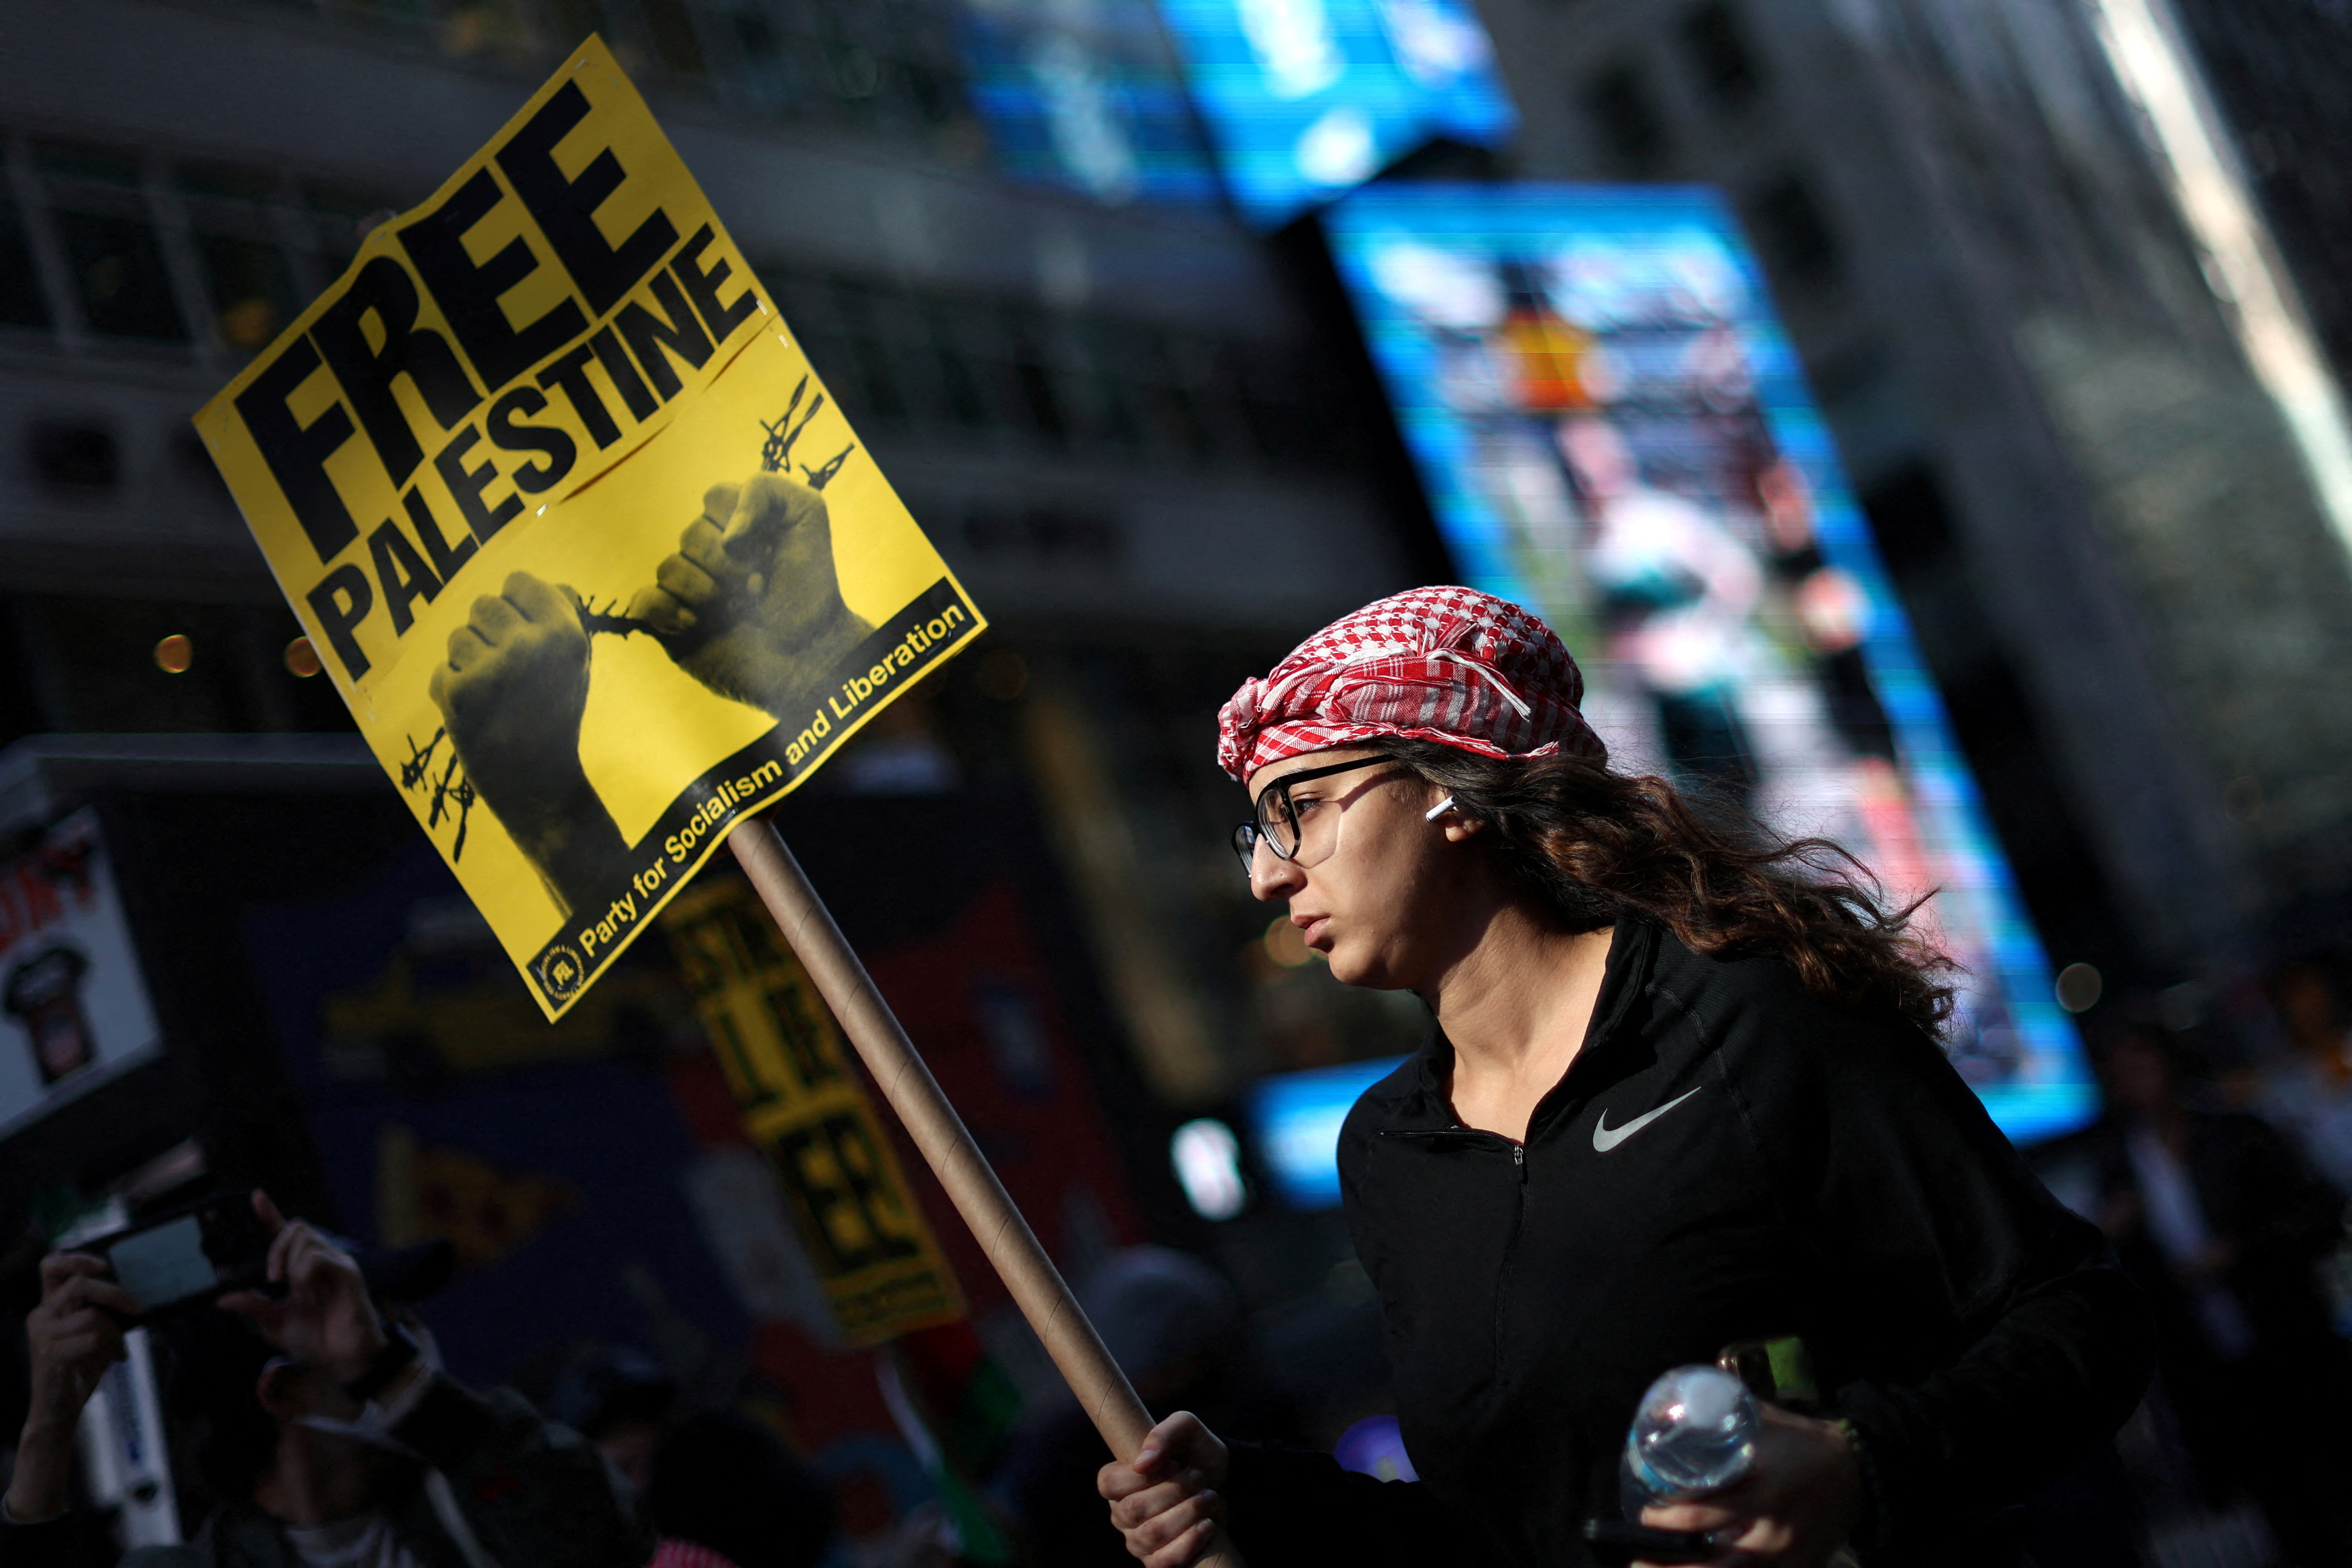 People attend a demonstration to express solidarity with Palestinians in Gaza in New York